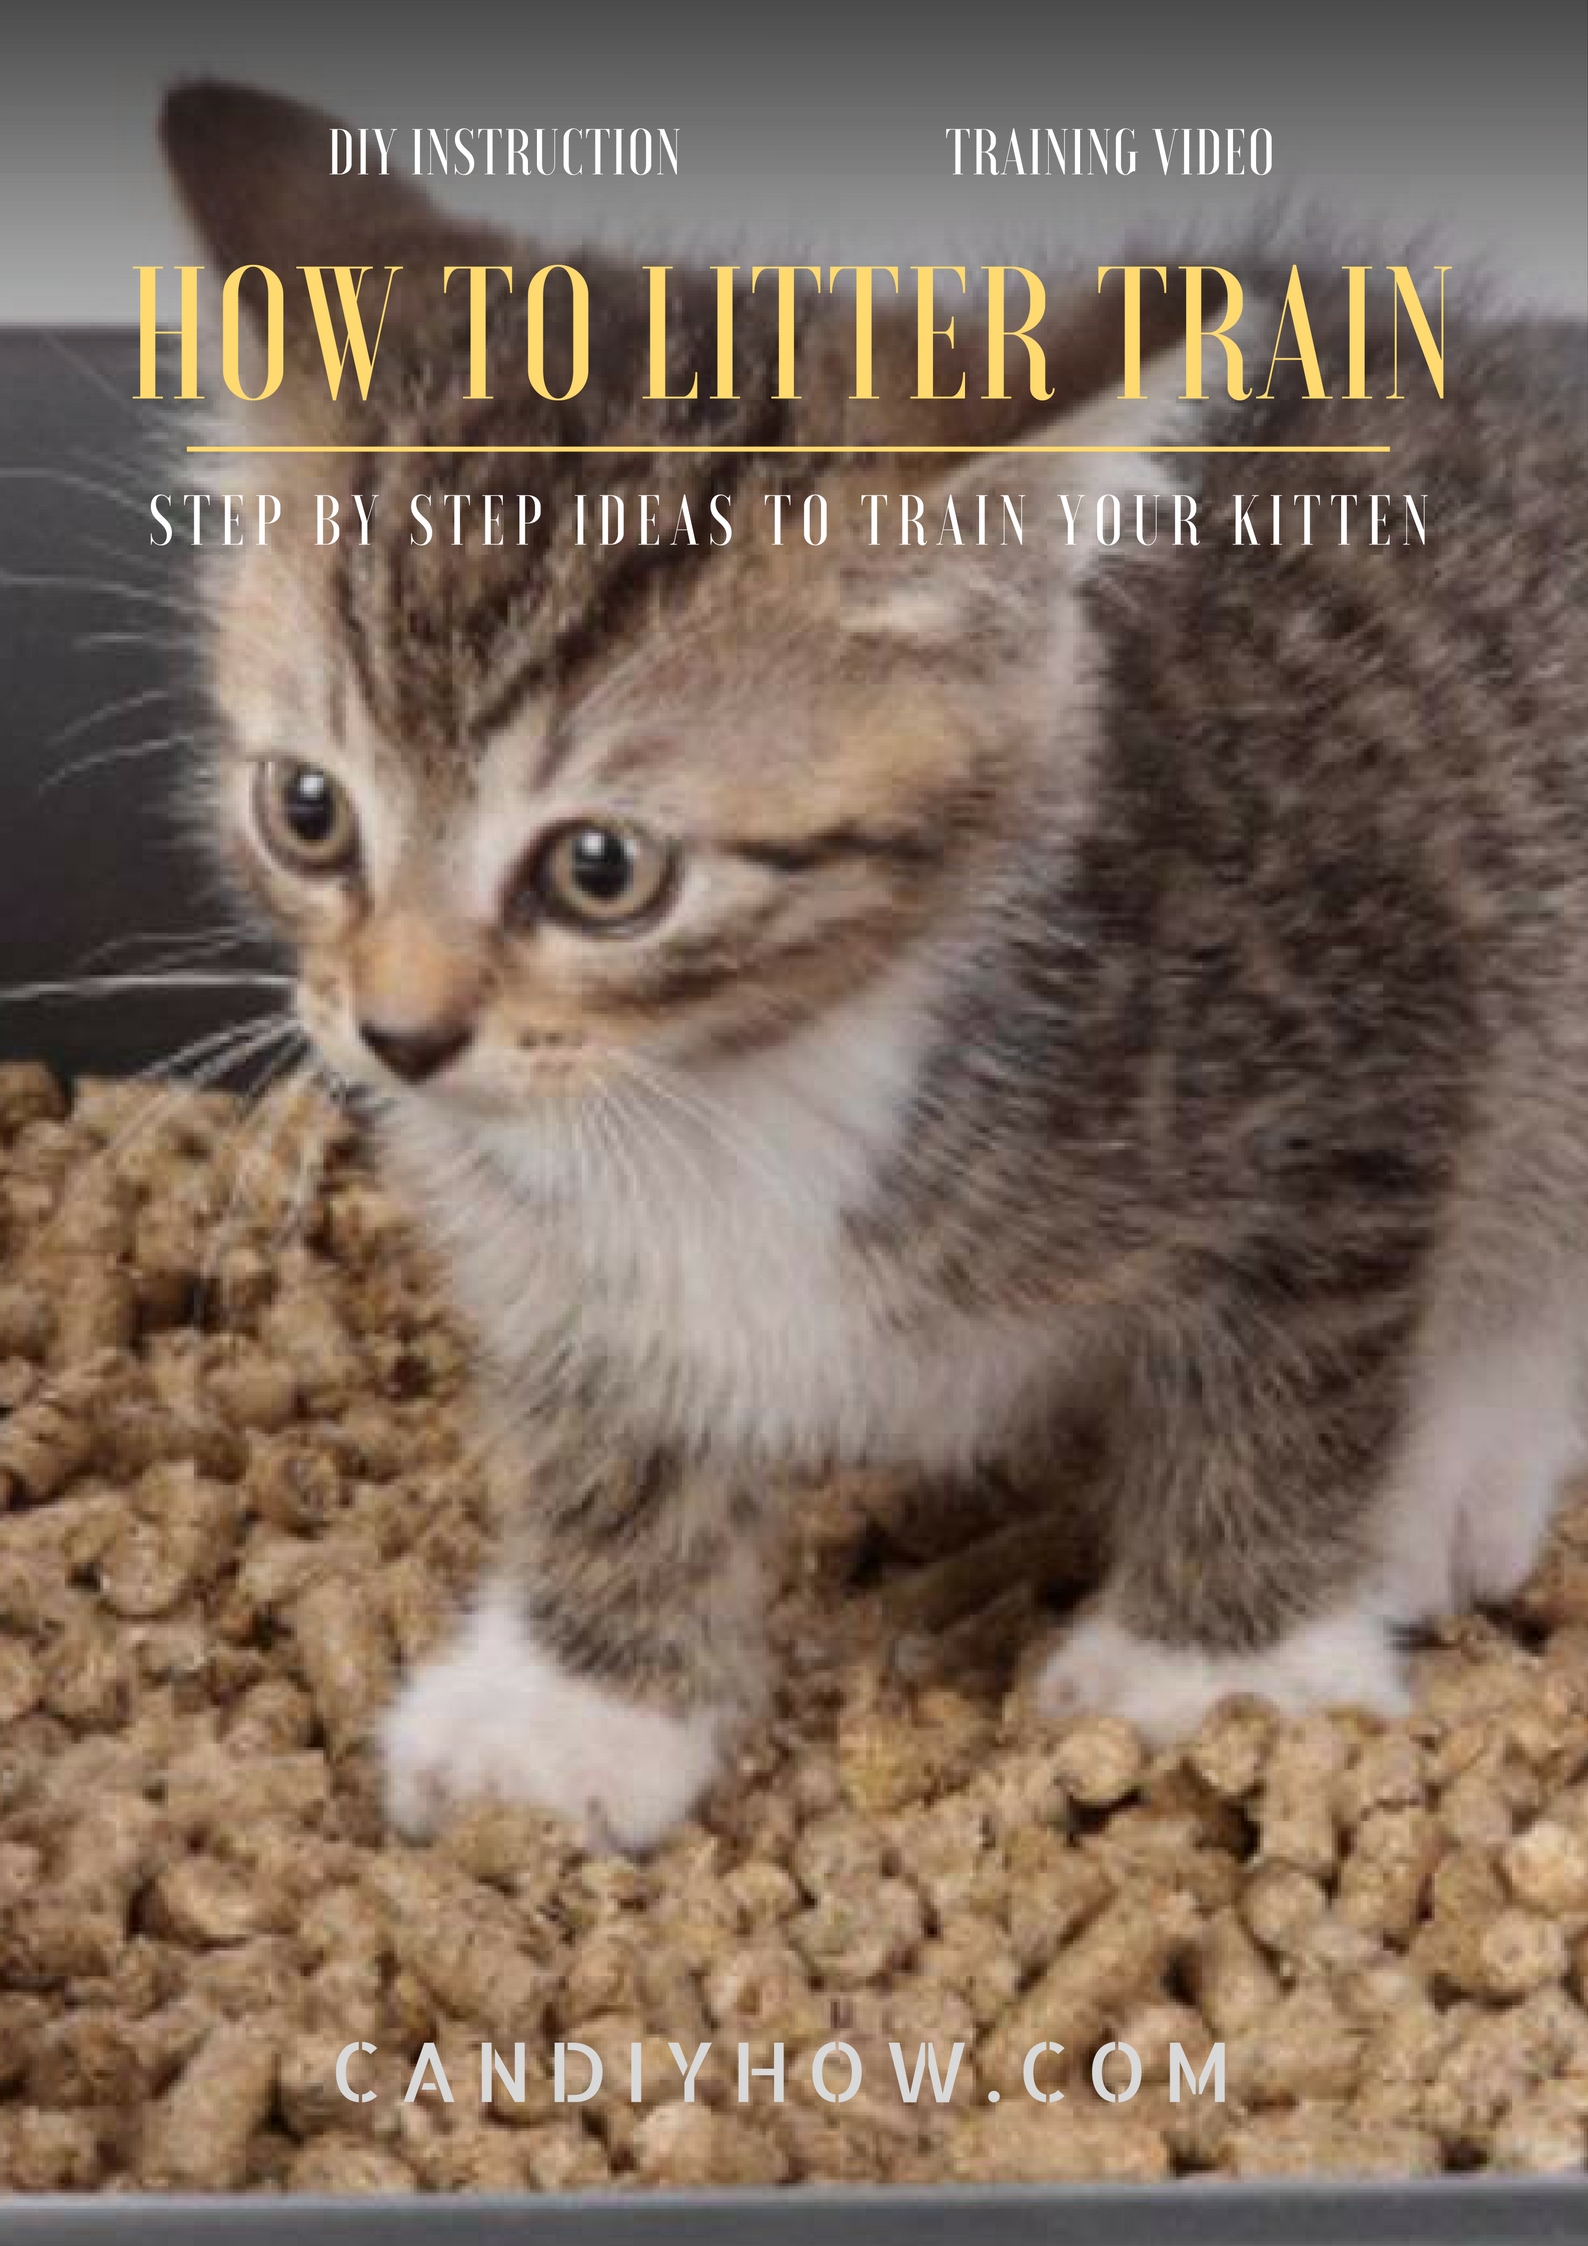 Here is Your Litter Box Kitty How Can I Litter Train My Kitten ( DIY